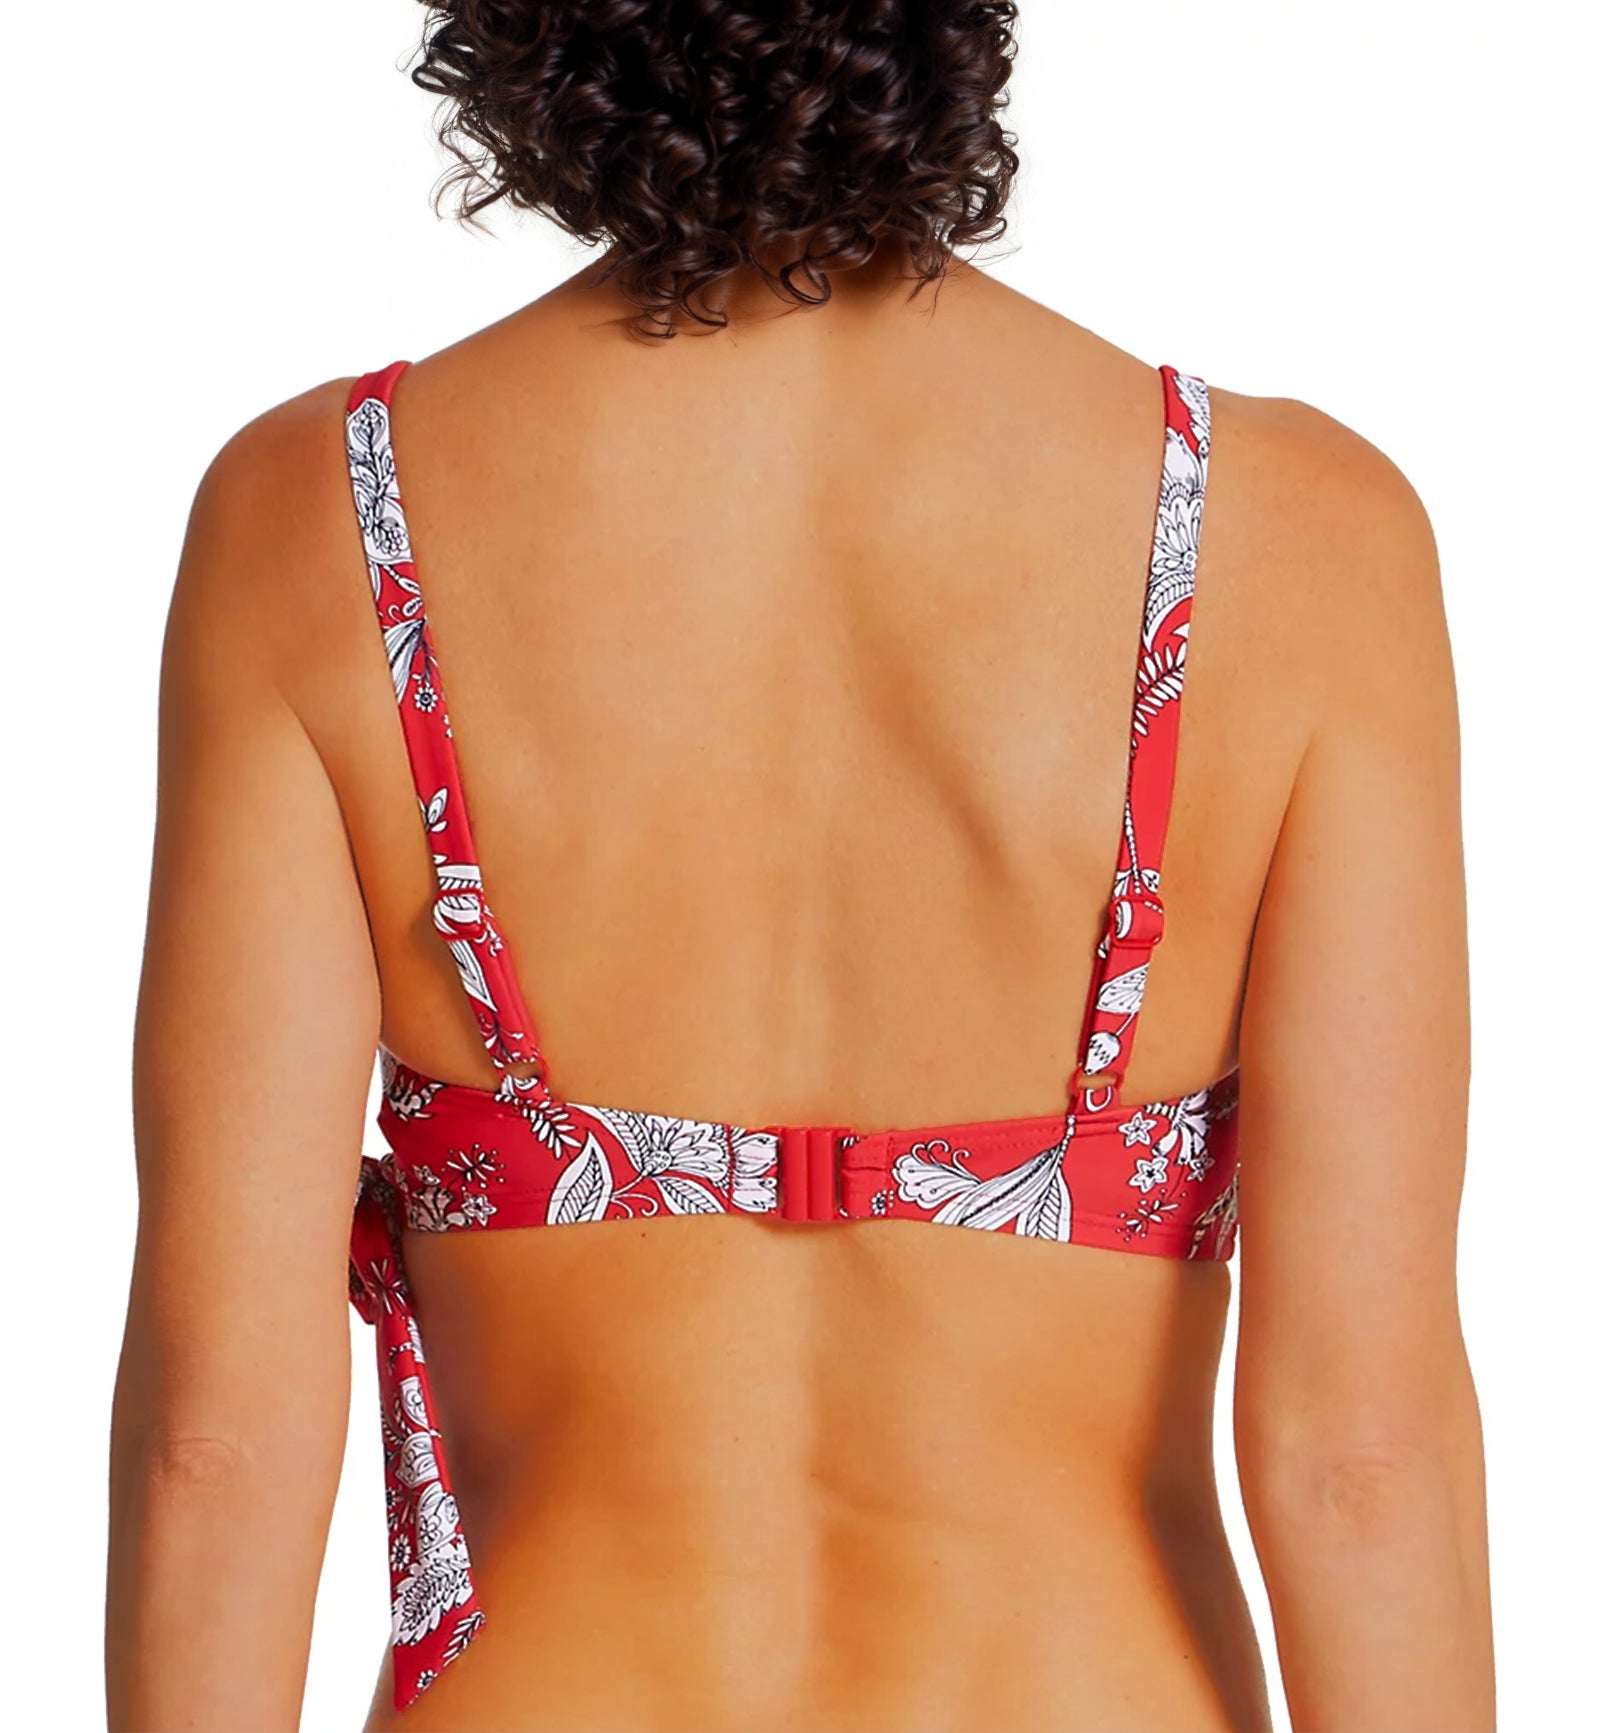 Pour Moi Freedom Underwire Non Padded Wrap Swim Top (25500),32DD,Red/White - Red/White,32DD